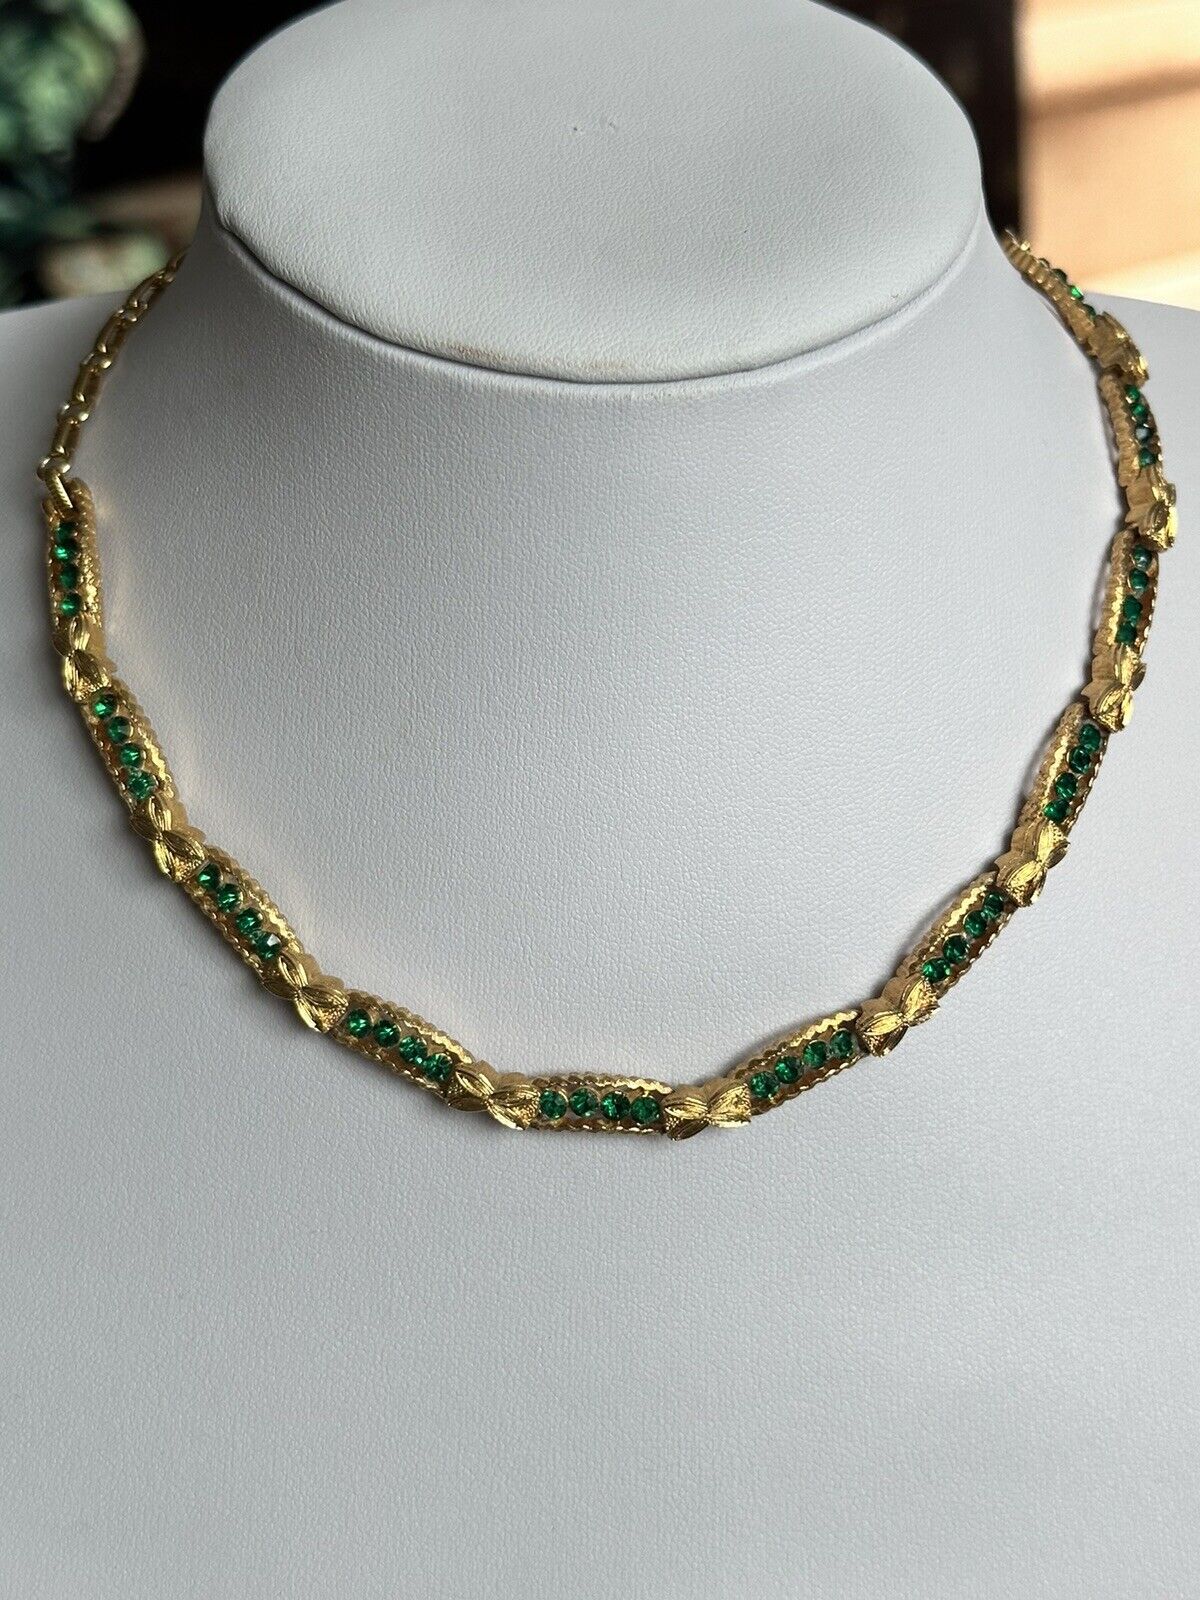 Vintage Gold Plated Detailed Green Stone Necklace